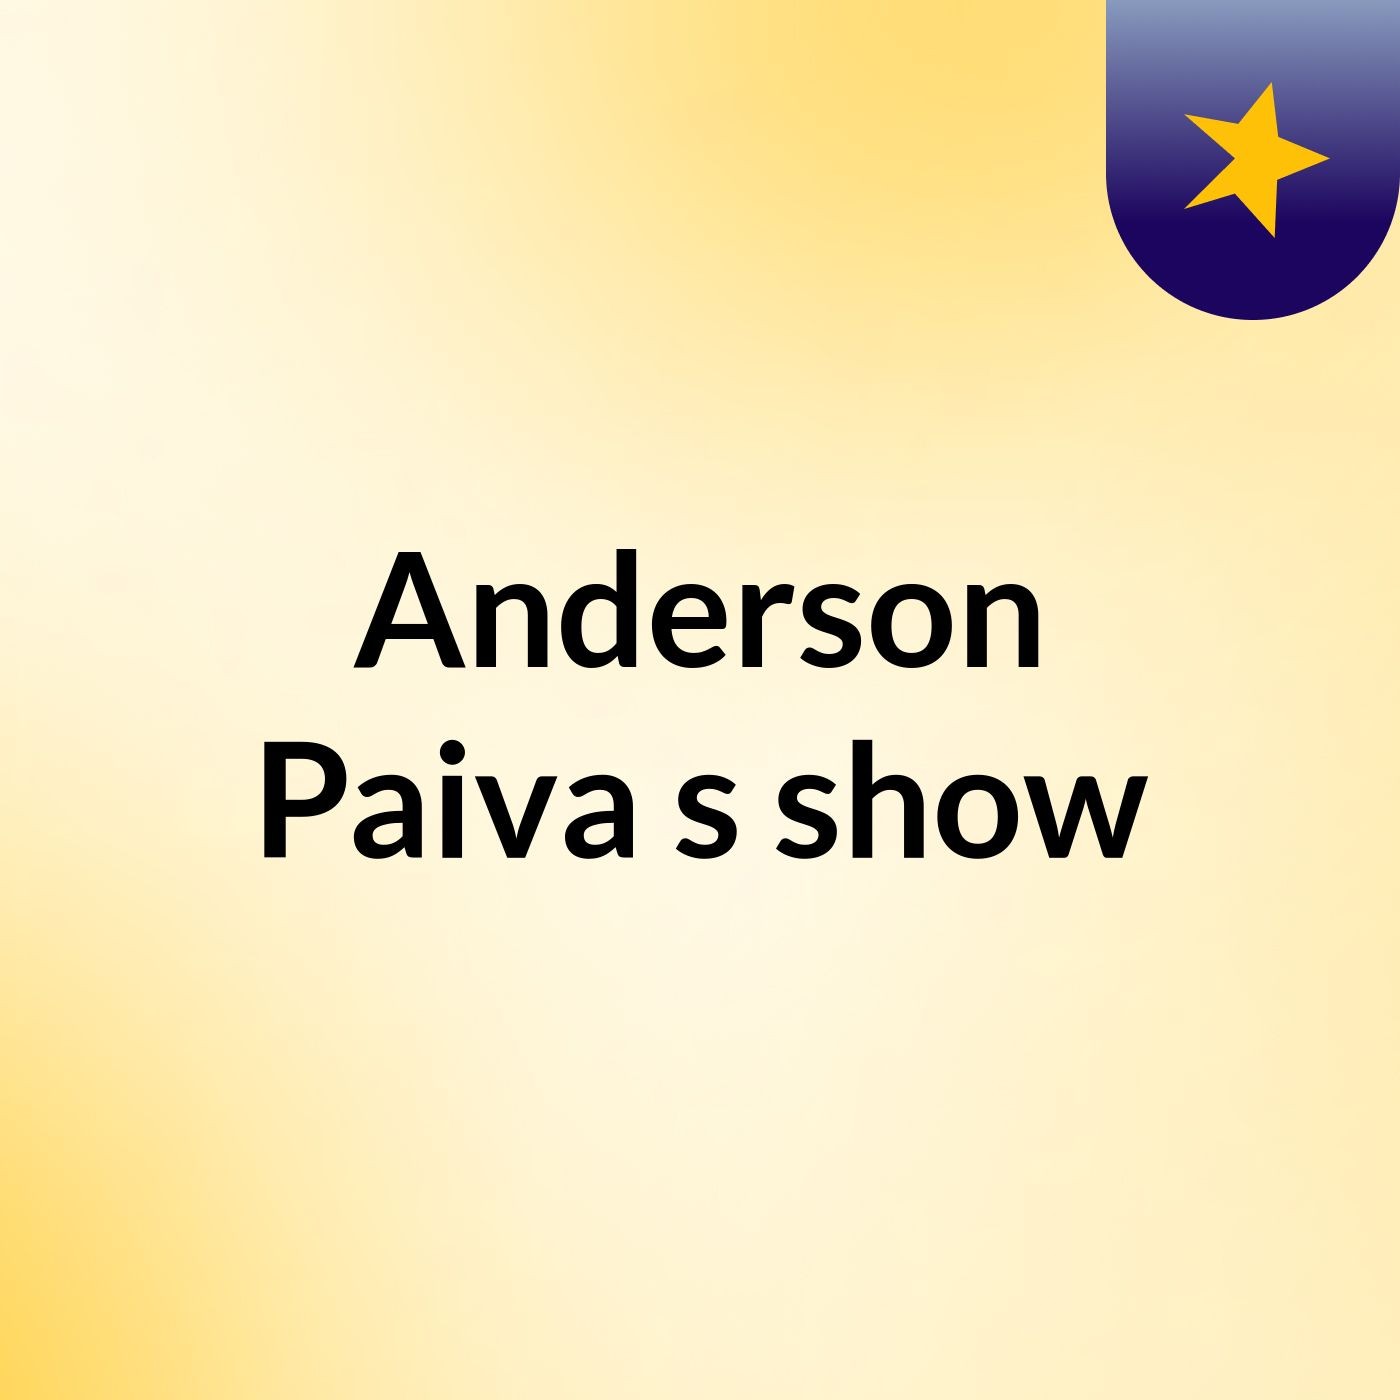 Anderson Paiva's show